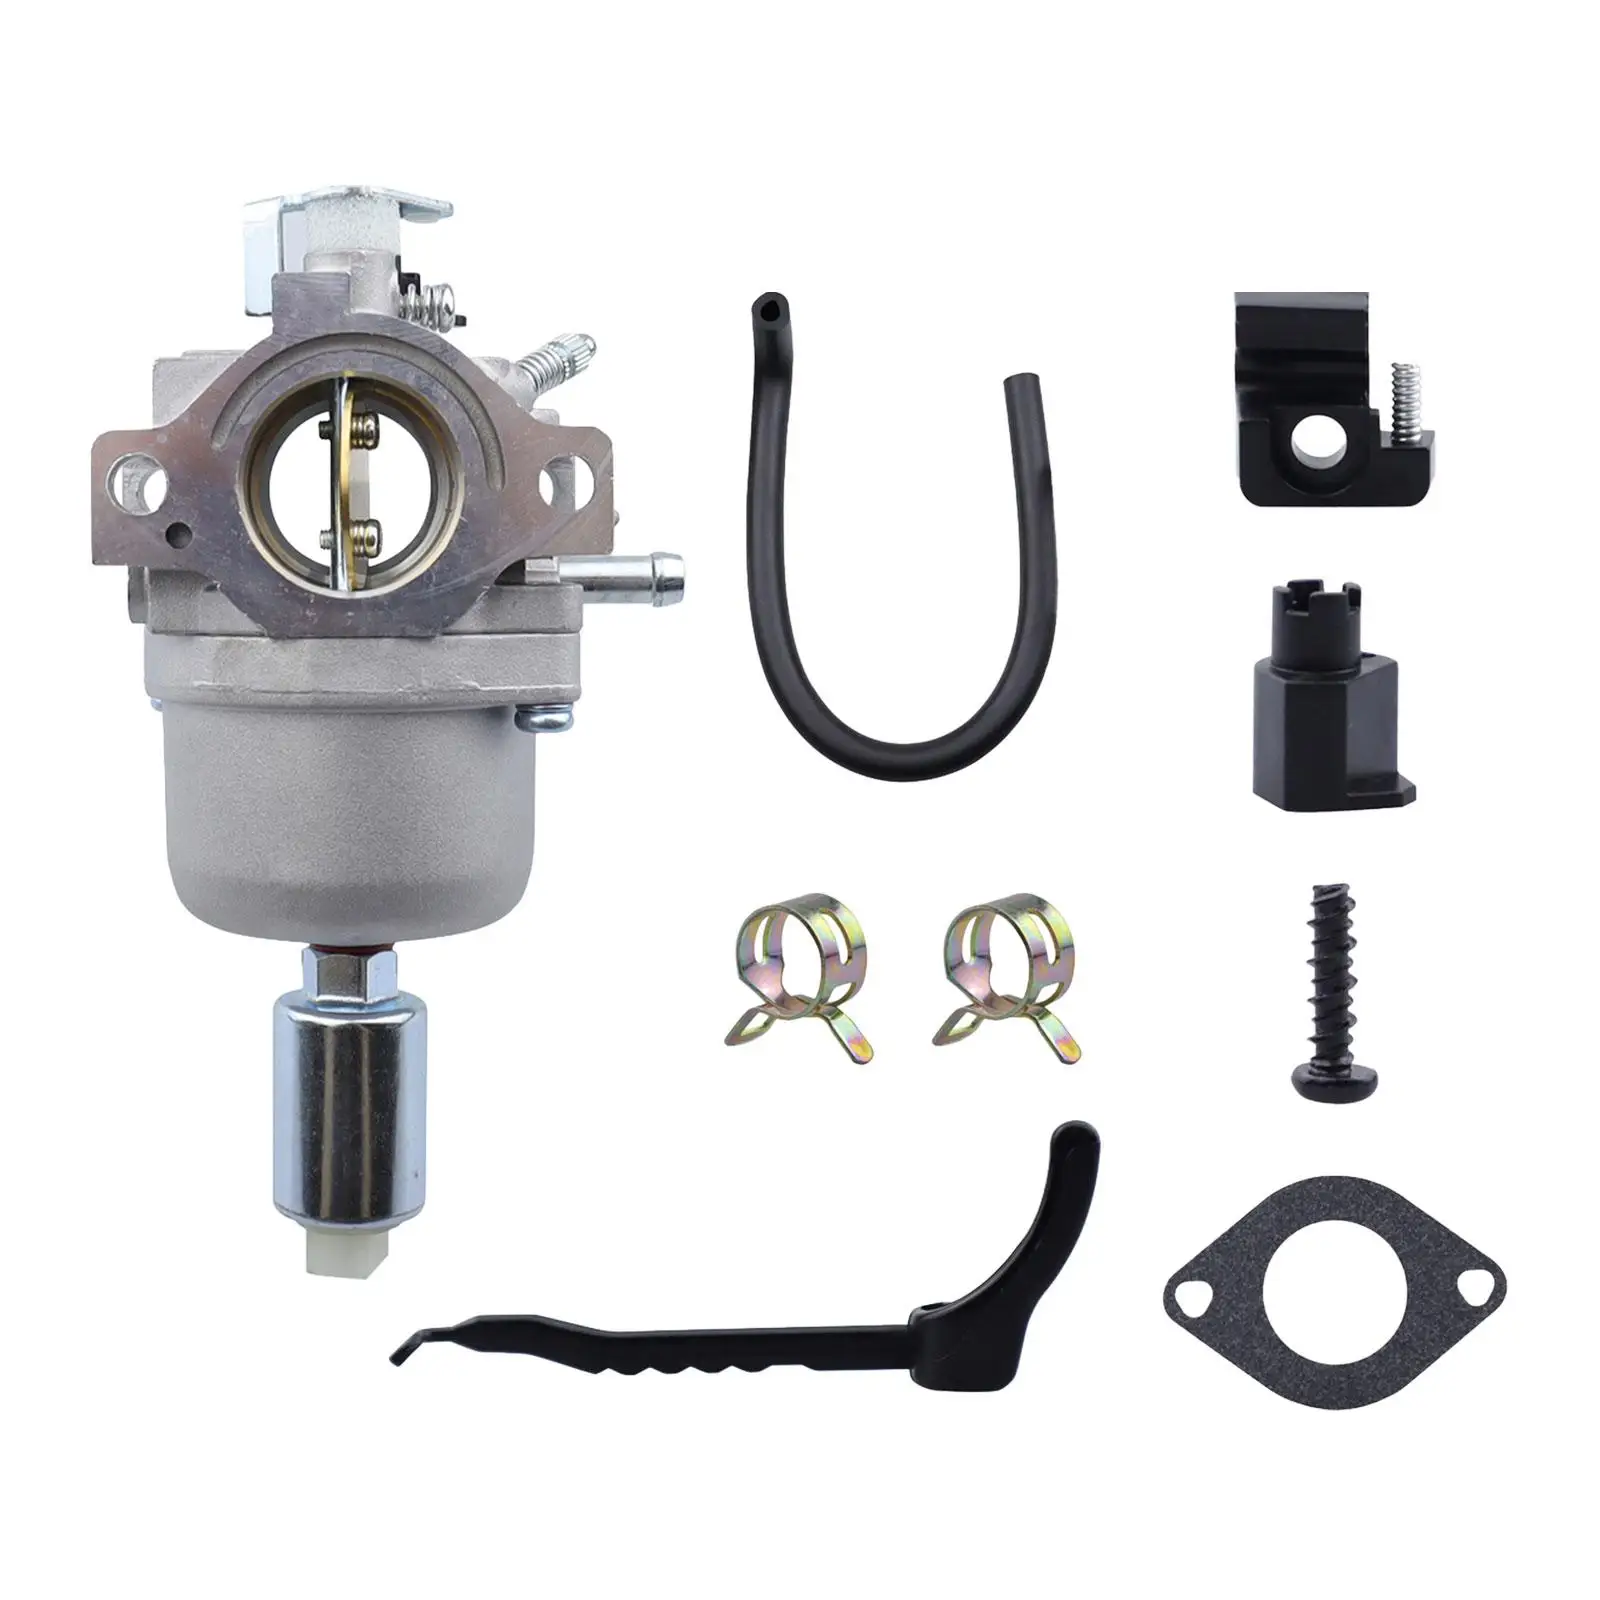 Carburetor Set 799727 791886 14 15 16 17 17.5 18 HP Directly Replace 495935 698620 for LT1000 Lawn Mower Carb 31C707 Durable